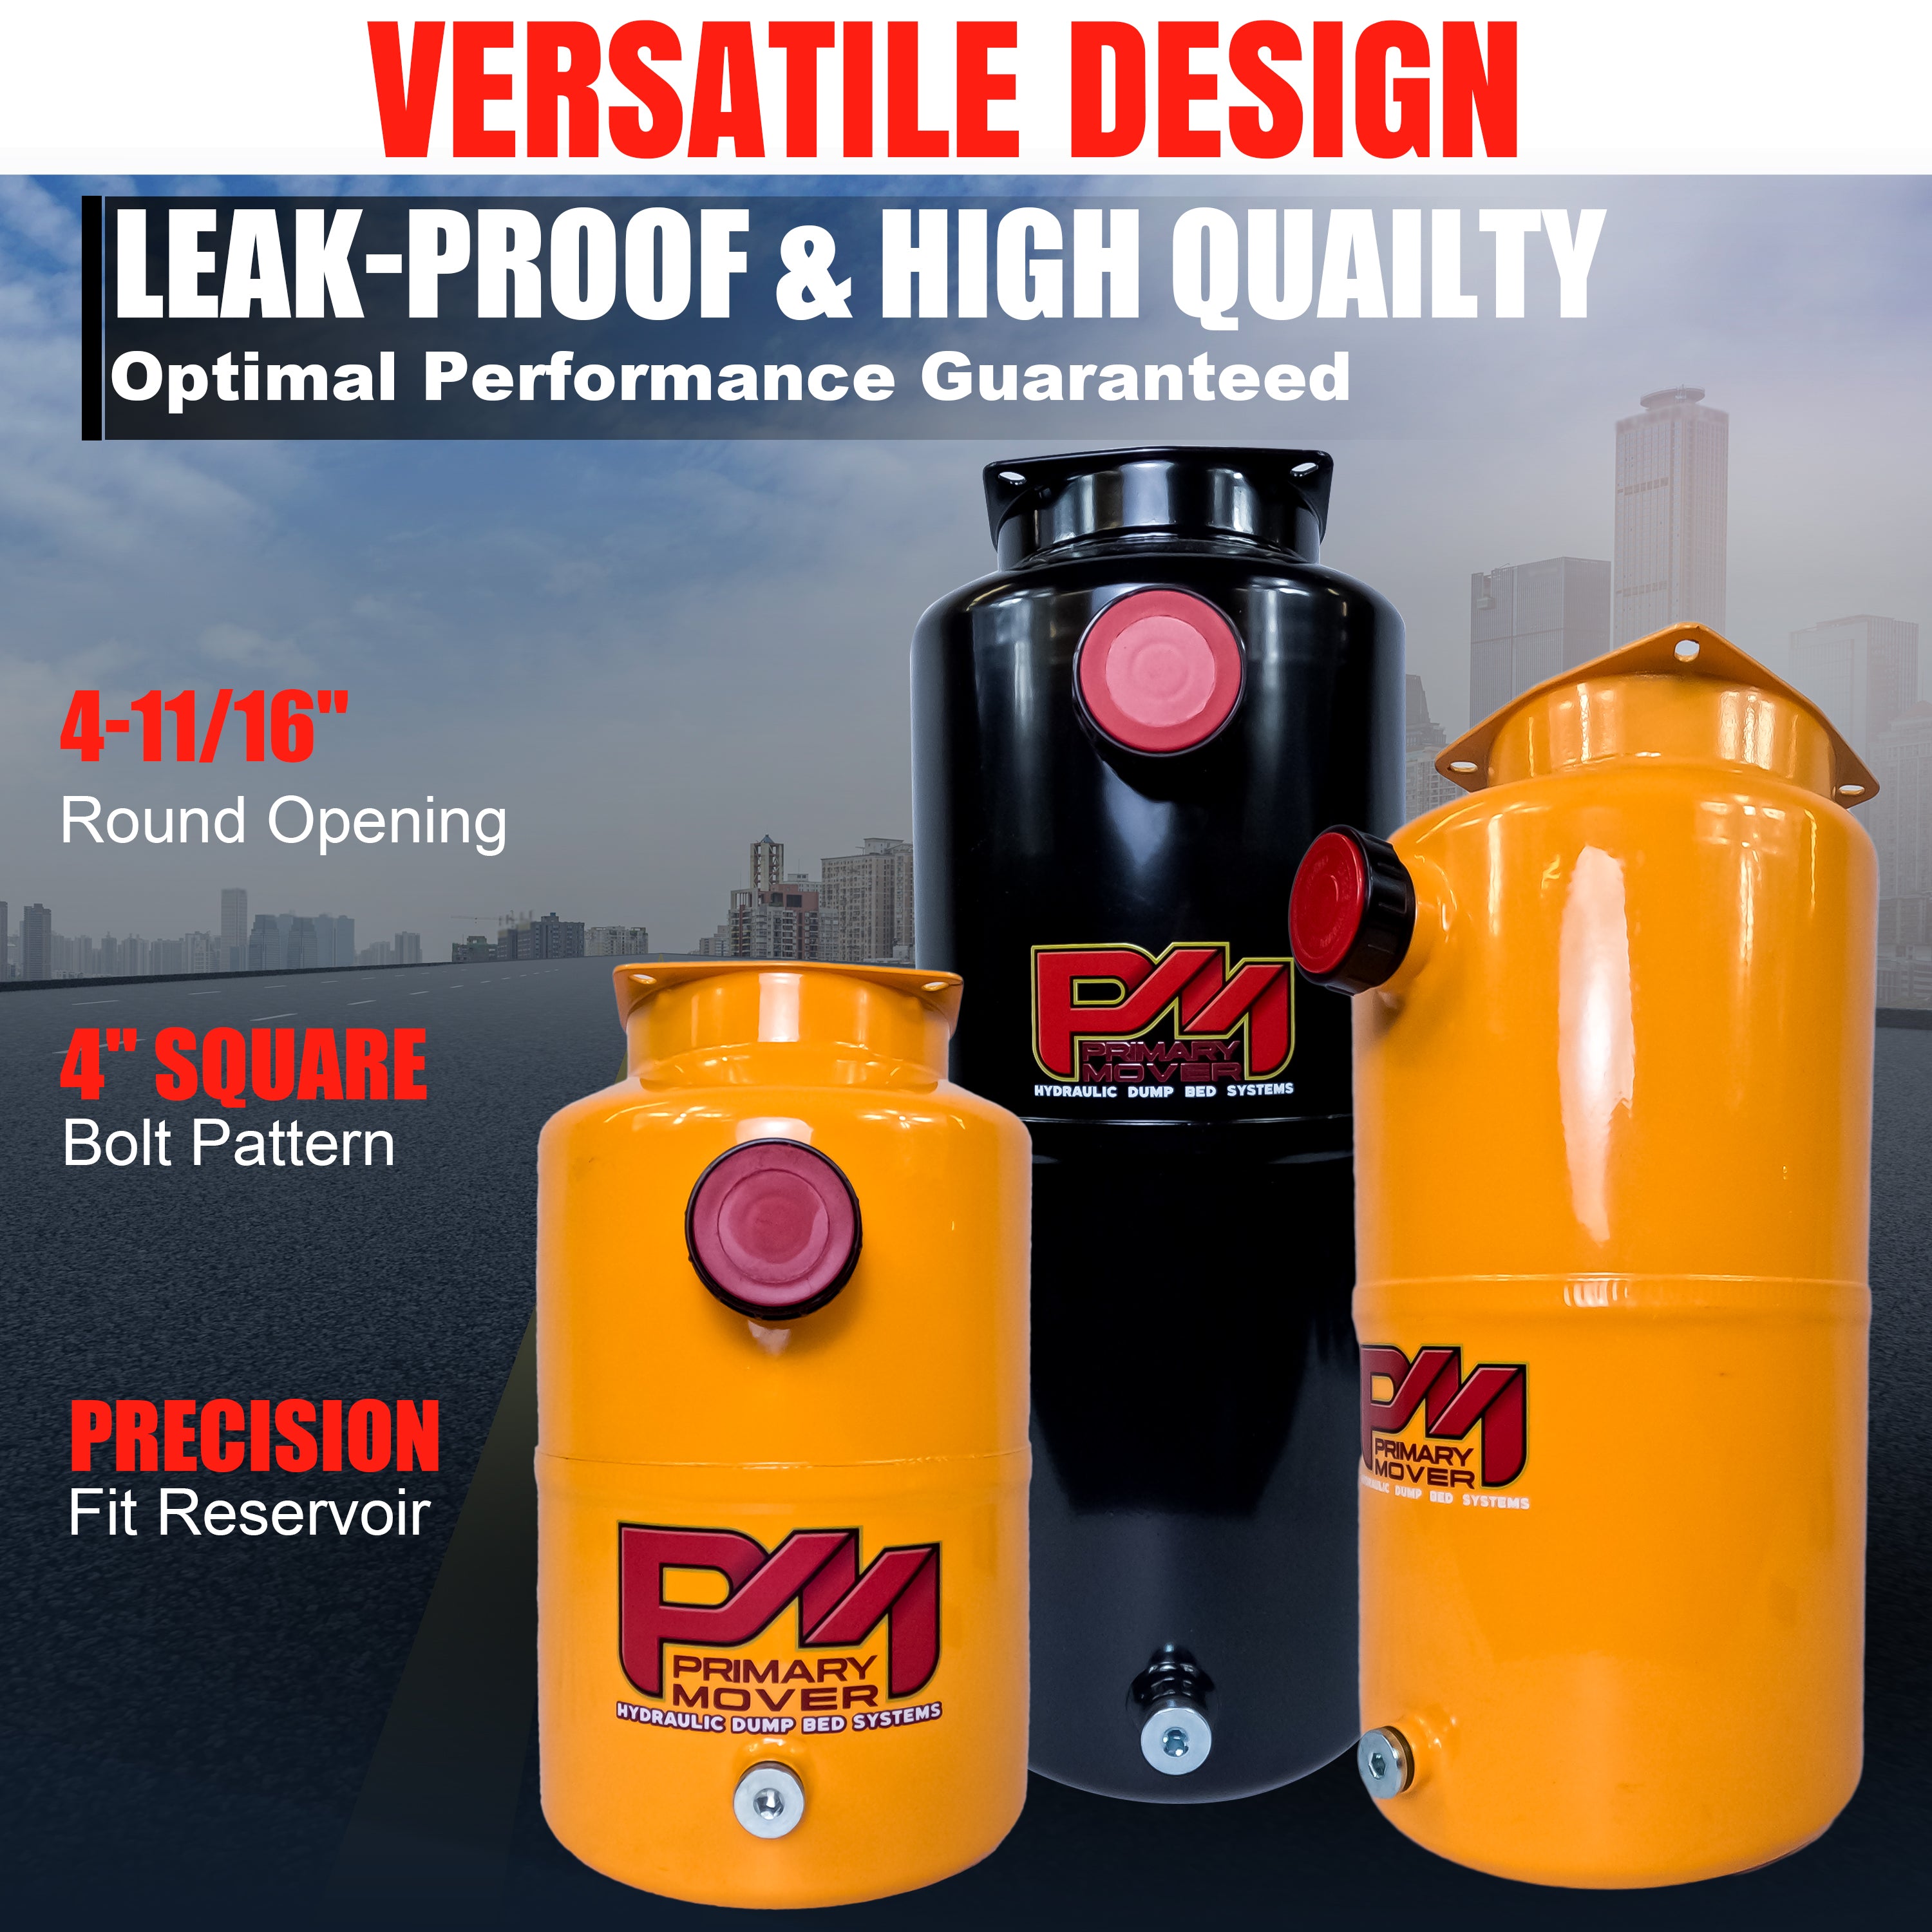 8-quart steel hydraulic reservoir with plug and breather caps. Precision measurements for compatibility with various hydraulic systems. Durable steel construction for long-lasting performance. Dimensions: 14.5 L x 7 W x 8.5 H. Will work with any KTI 12Vdc